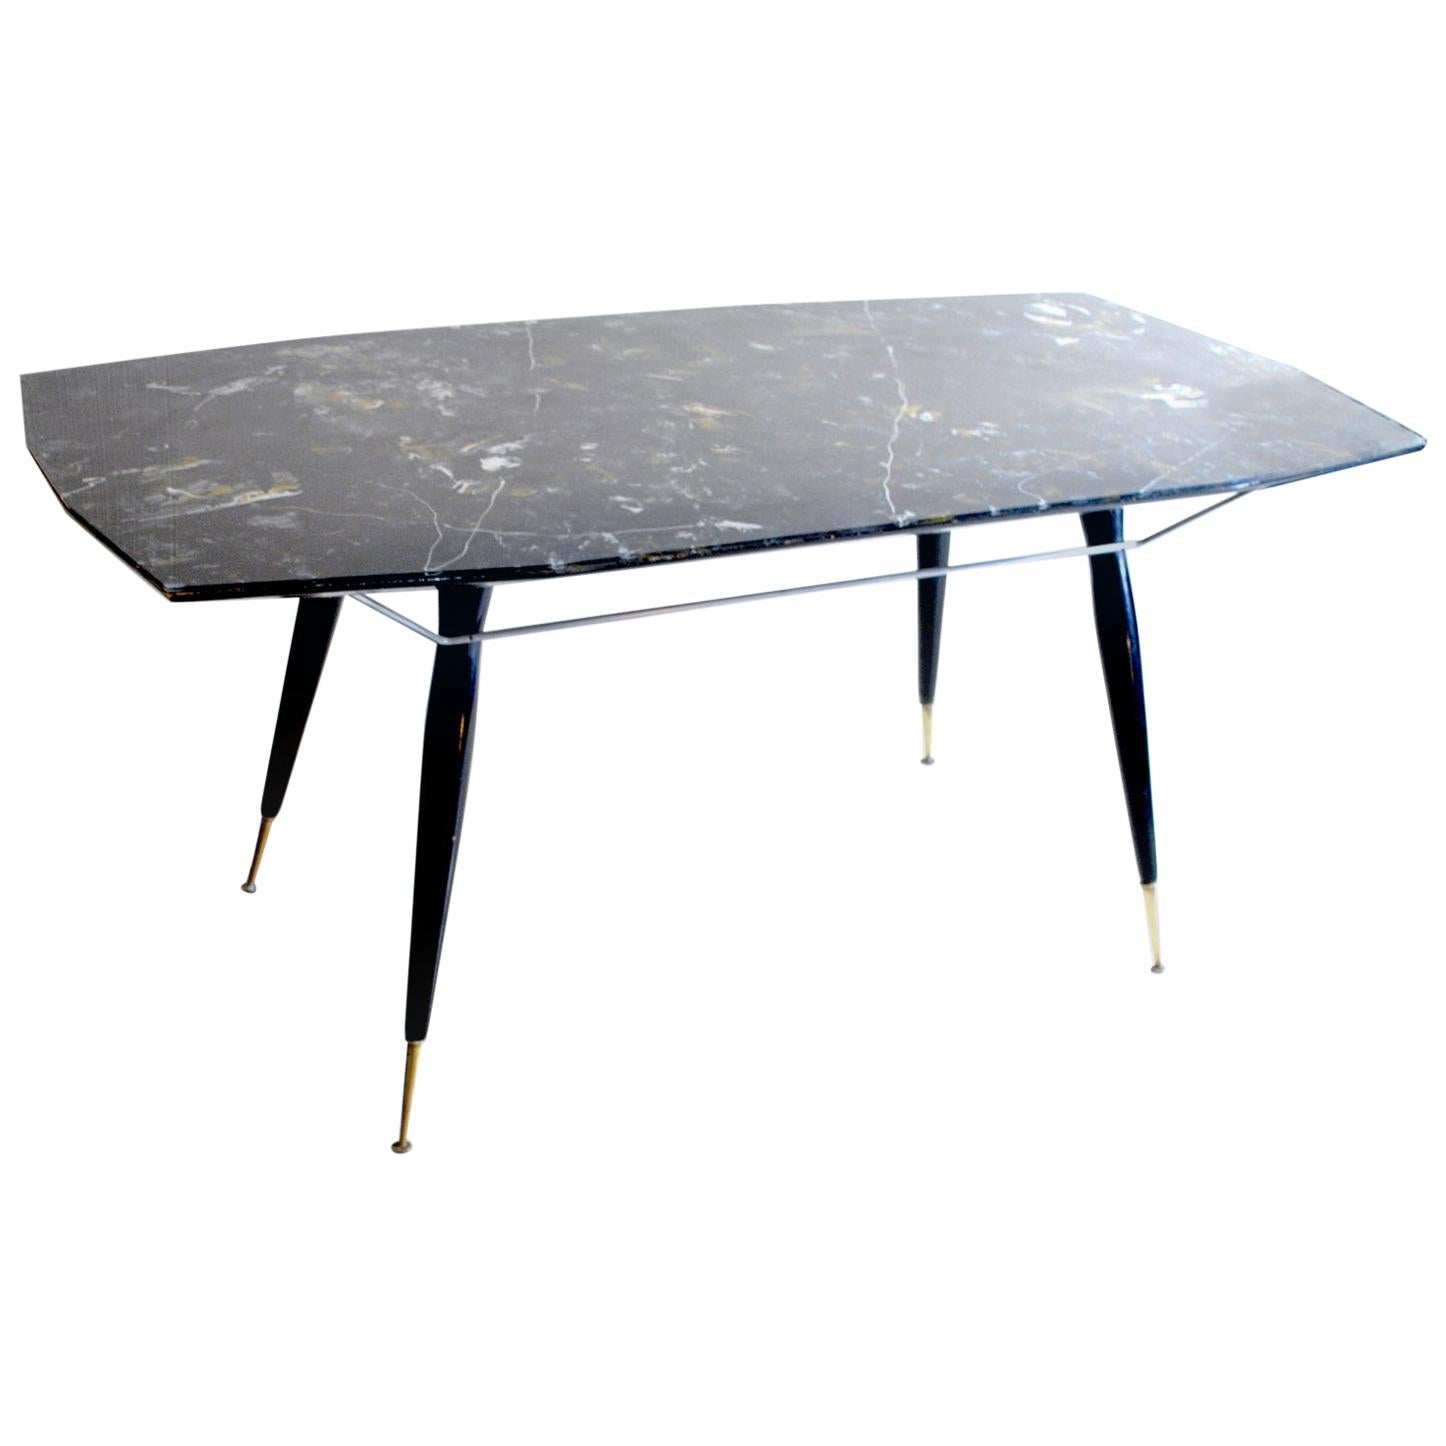 Italian Midcentury Table from the 1960s